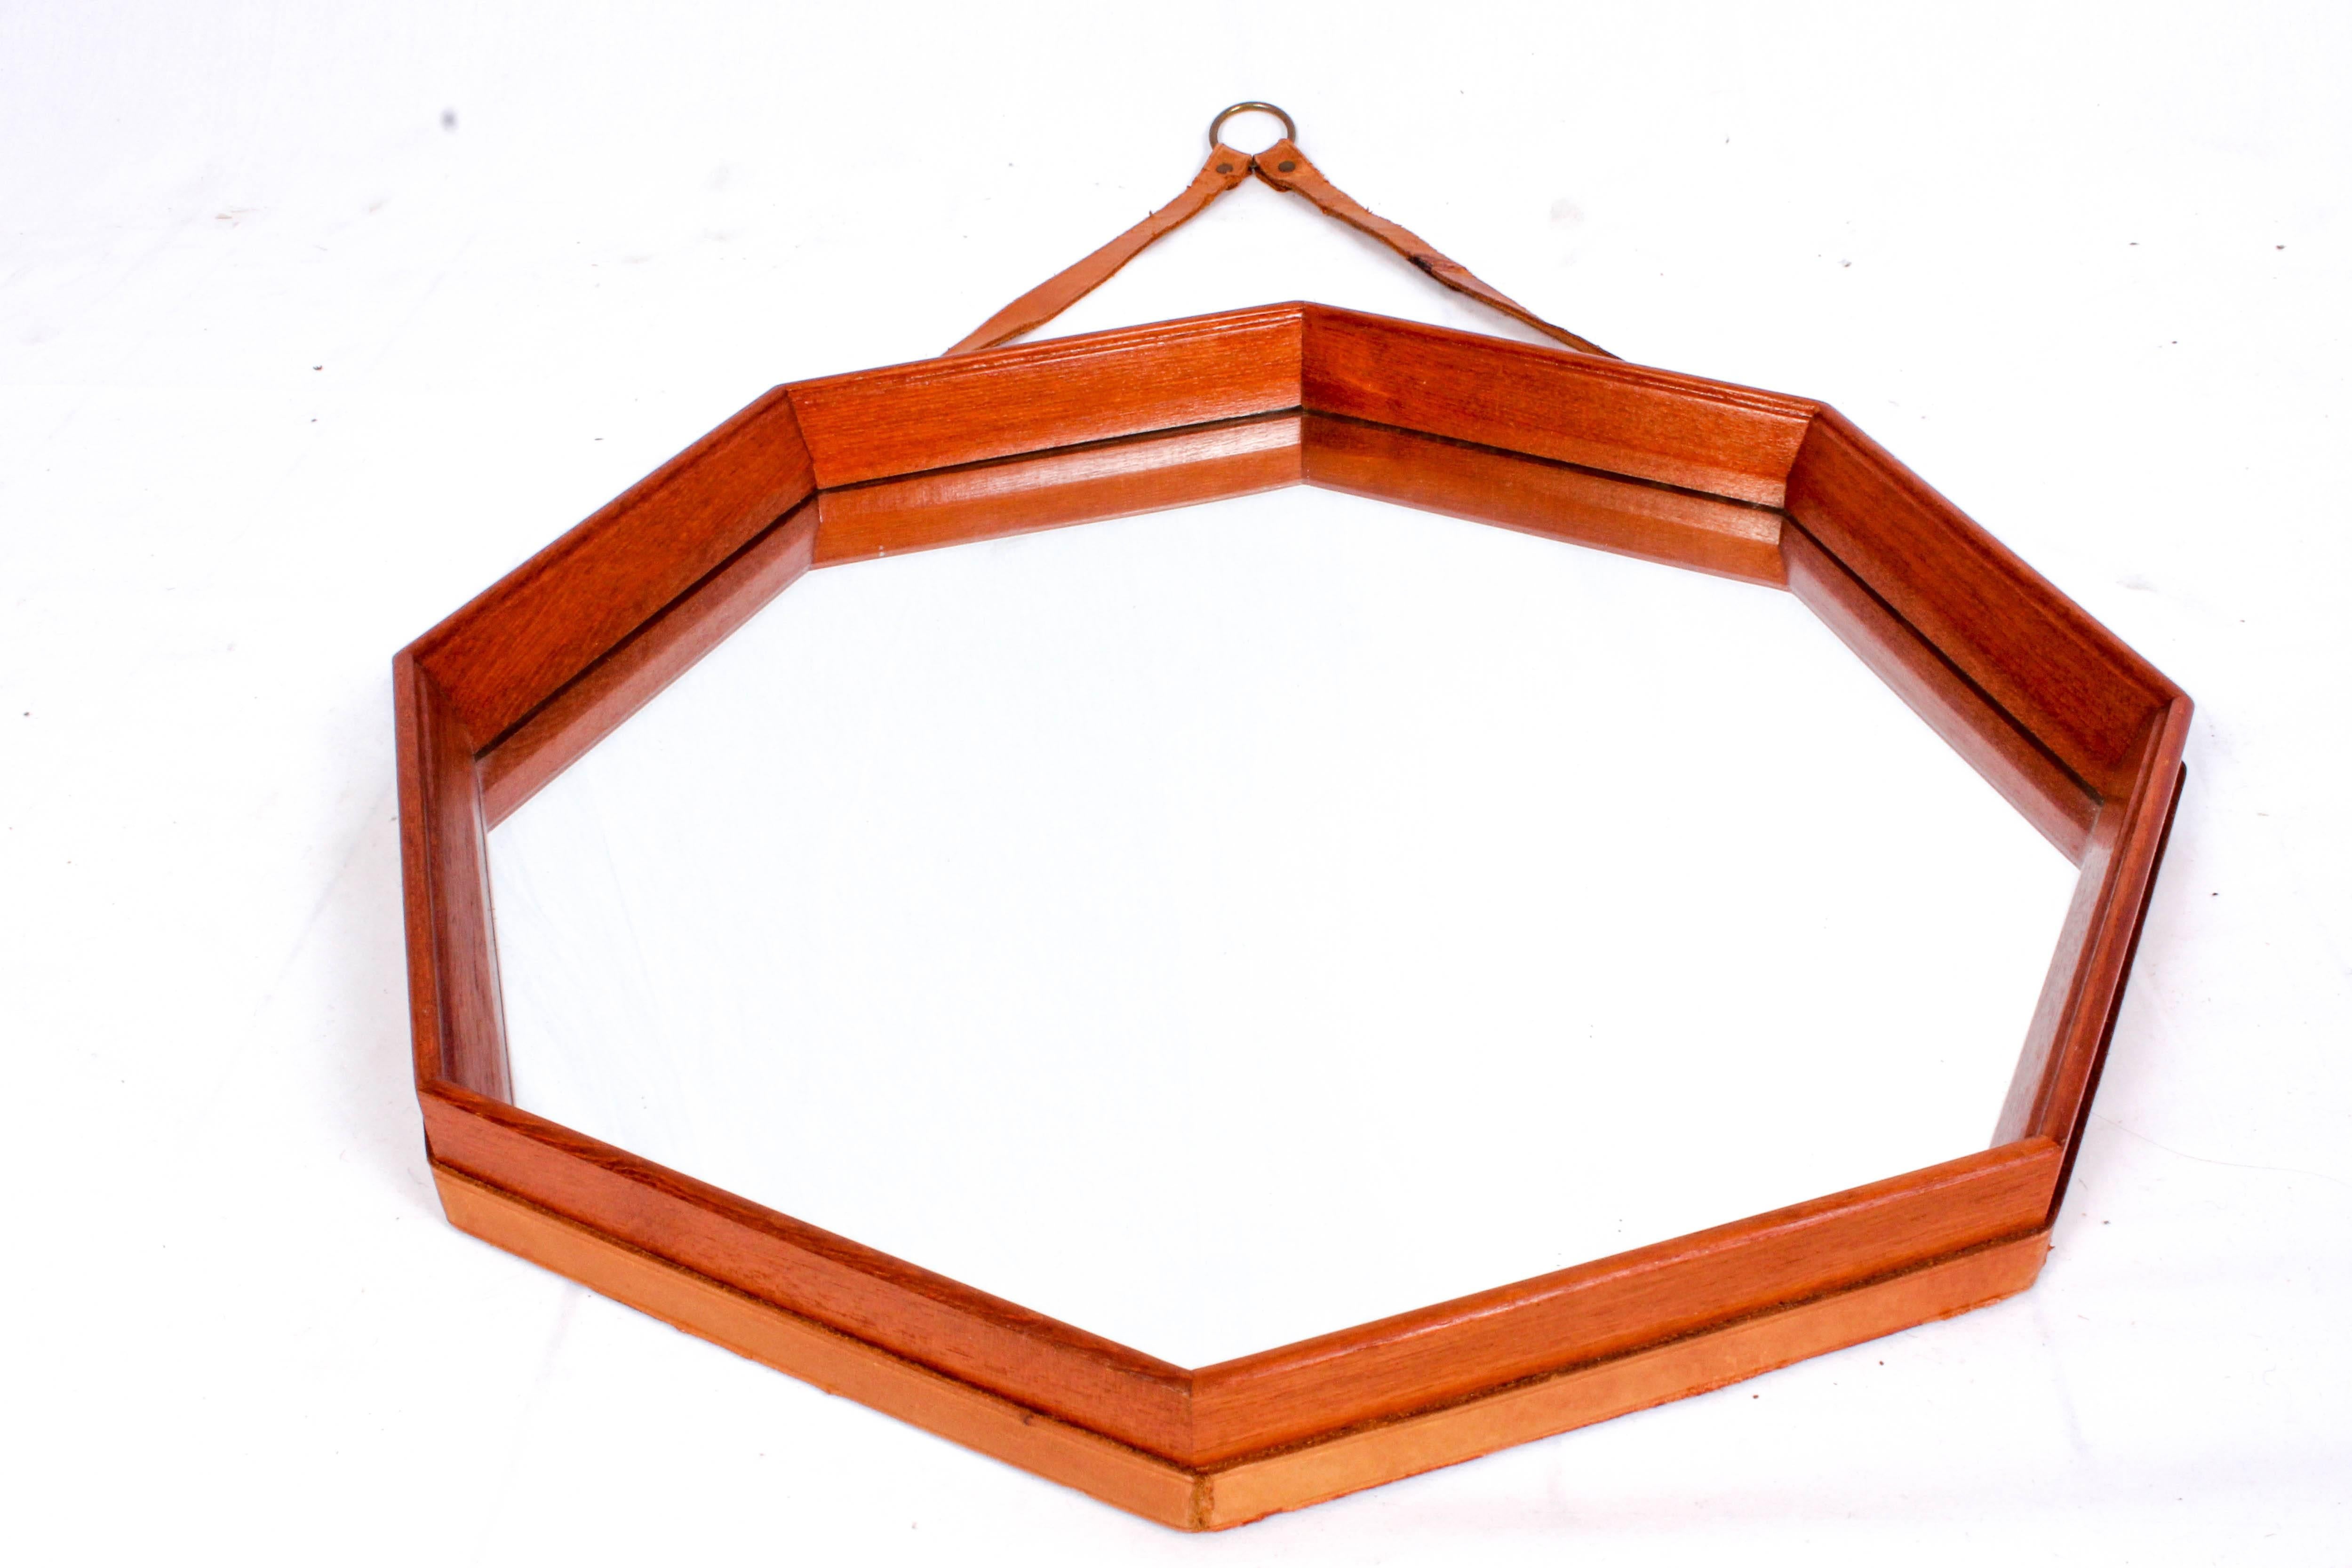 Midcentury Swedish octagonal teak mirror with original leather strap. This is a rare and very decorative mirror with a nicely cut edge. The mirror is in excellent vintage condition but the leather strap has signs of usage and repairs.

This item